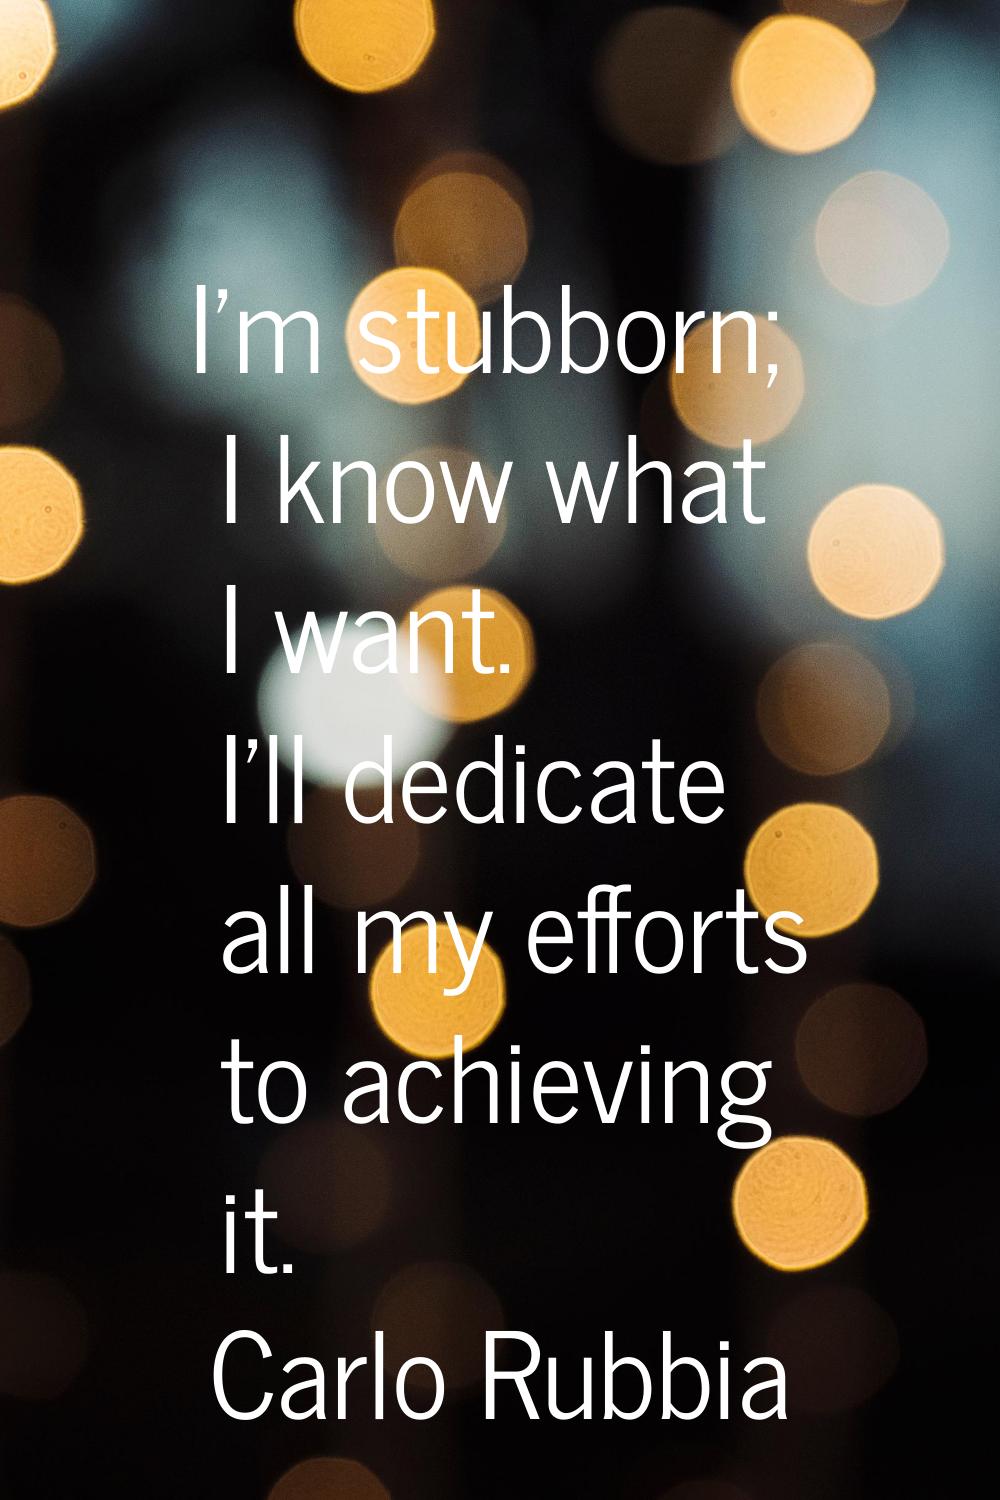 I'm stubborn; I know what I want. I'll dedicate all my efforts to achieving it.